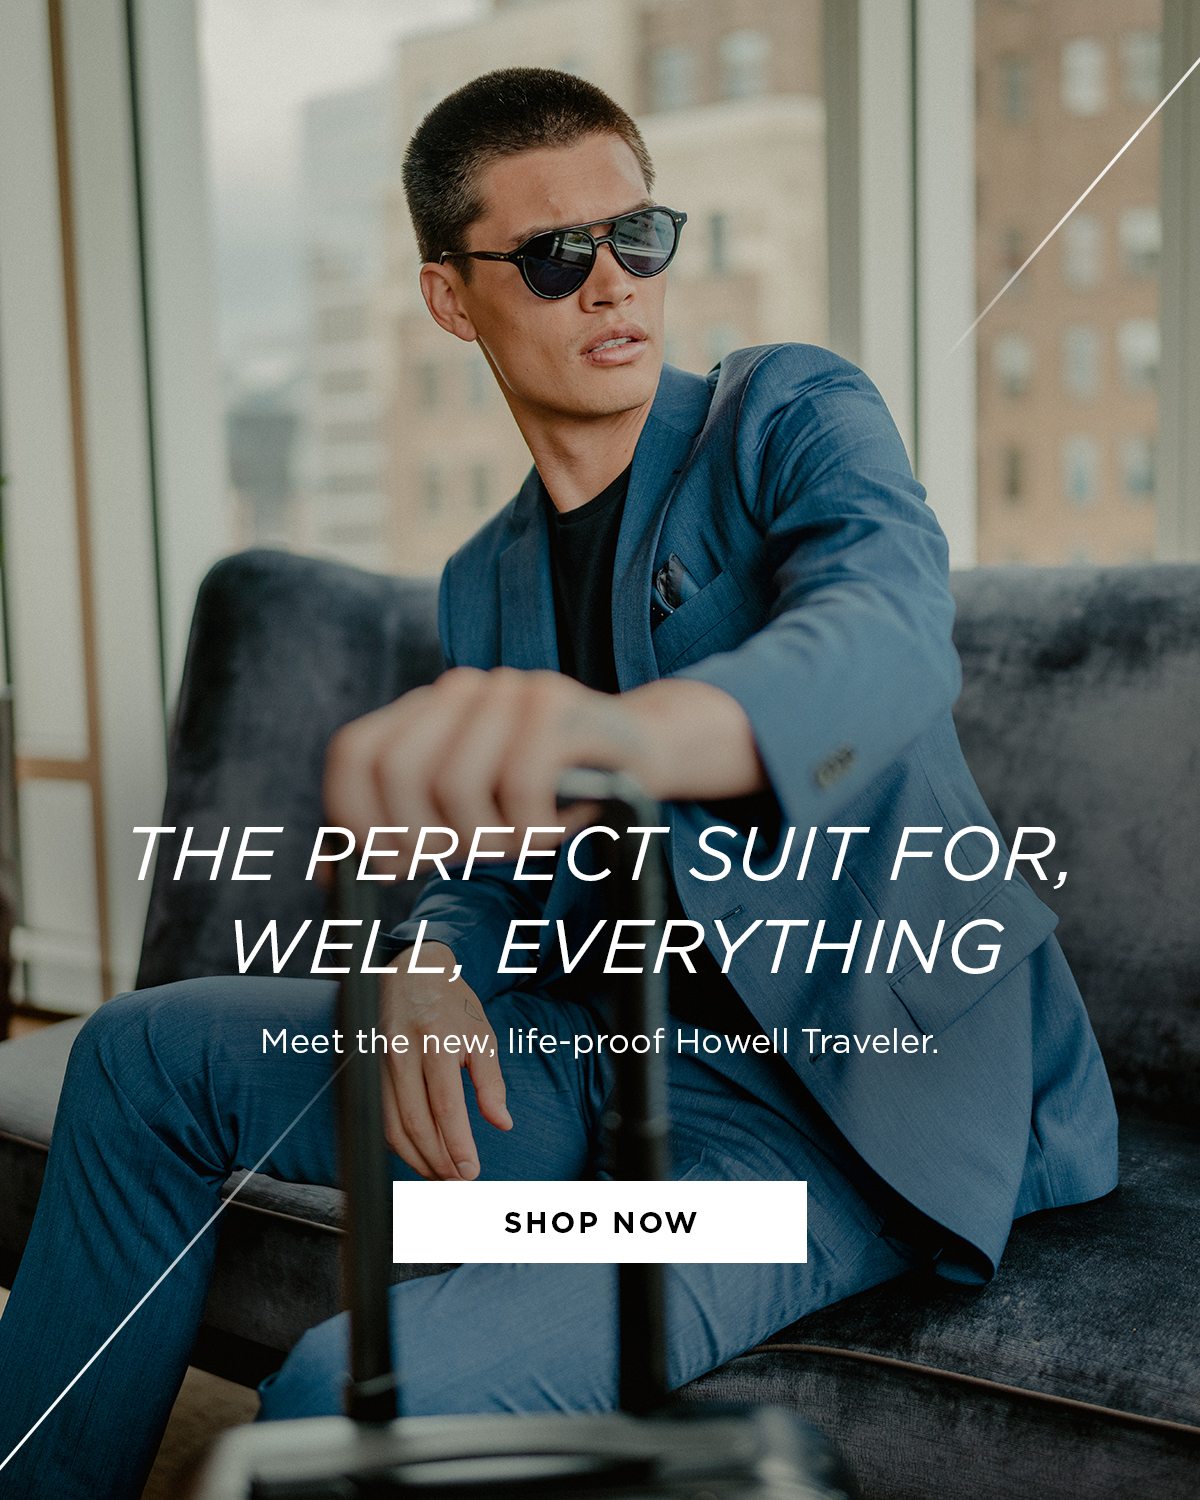 INDOCHINO | MADE FOR YOU